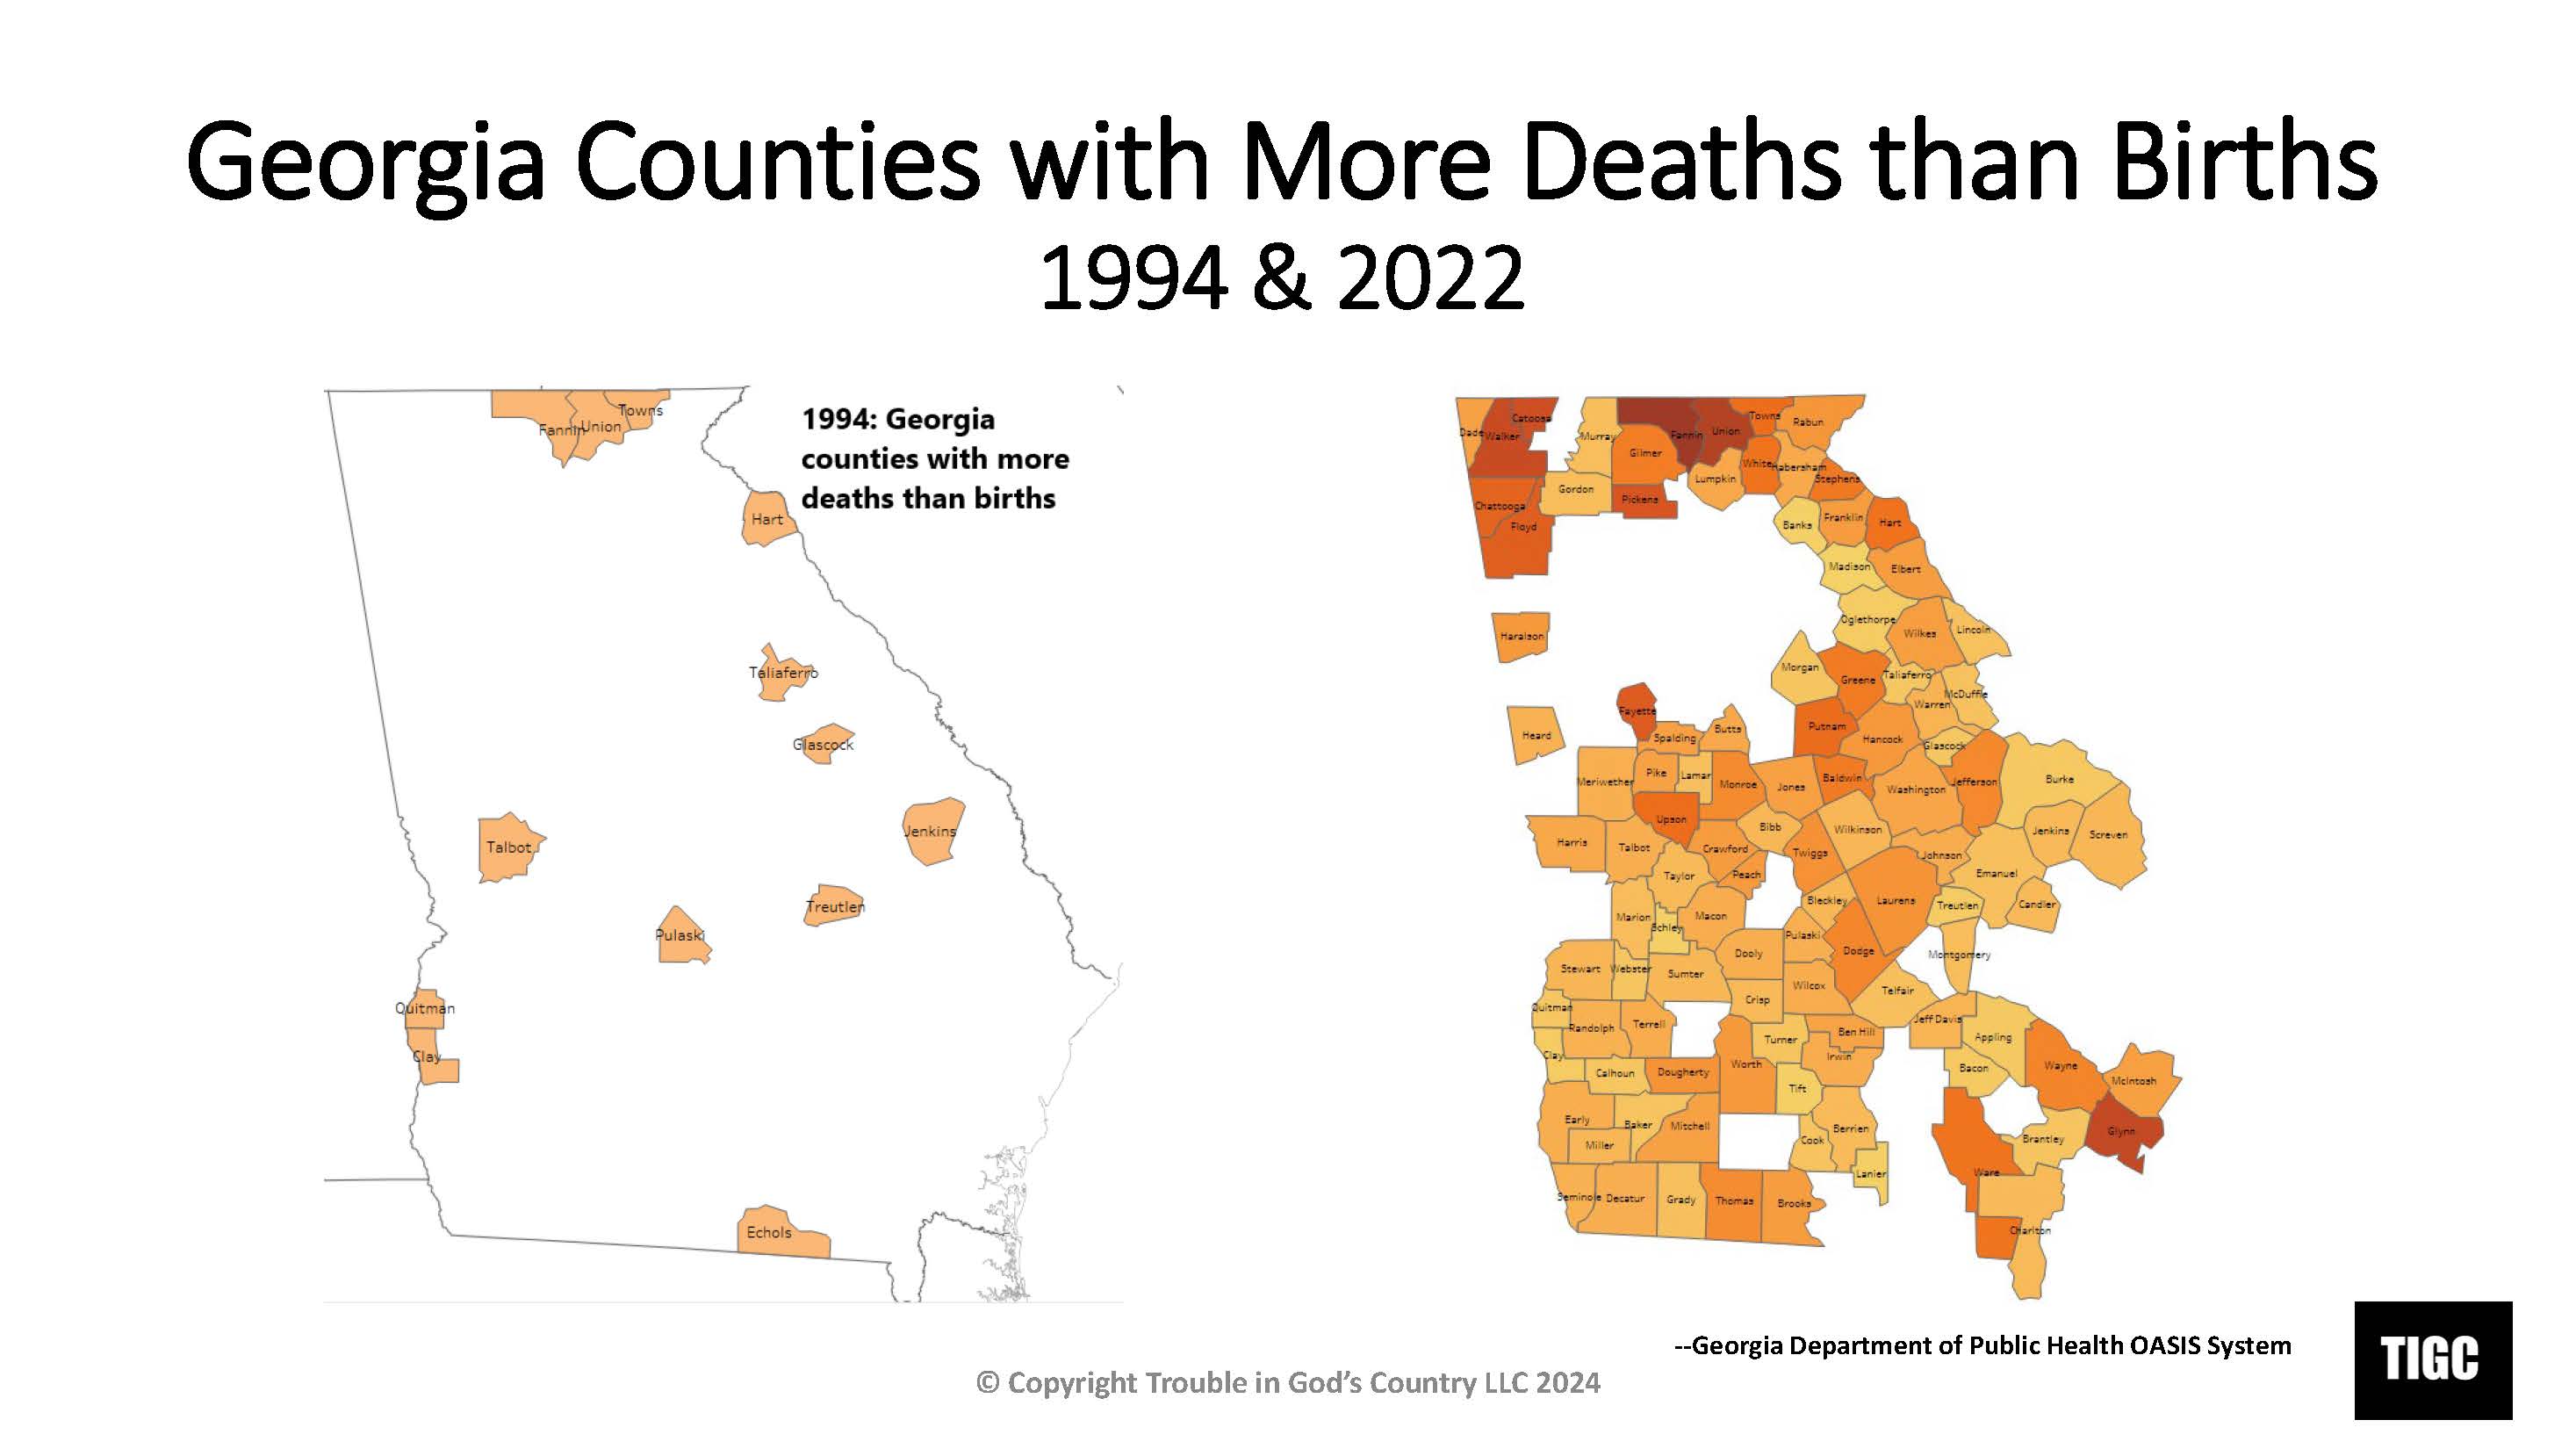 Georgia Counties with More Deaths than Births 1994 & 2022